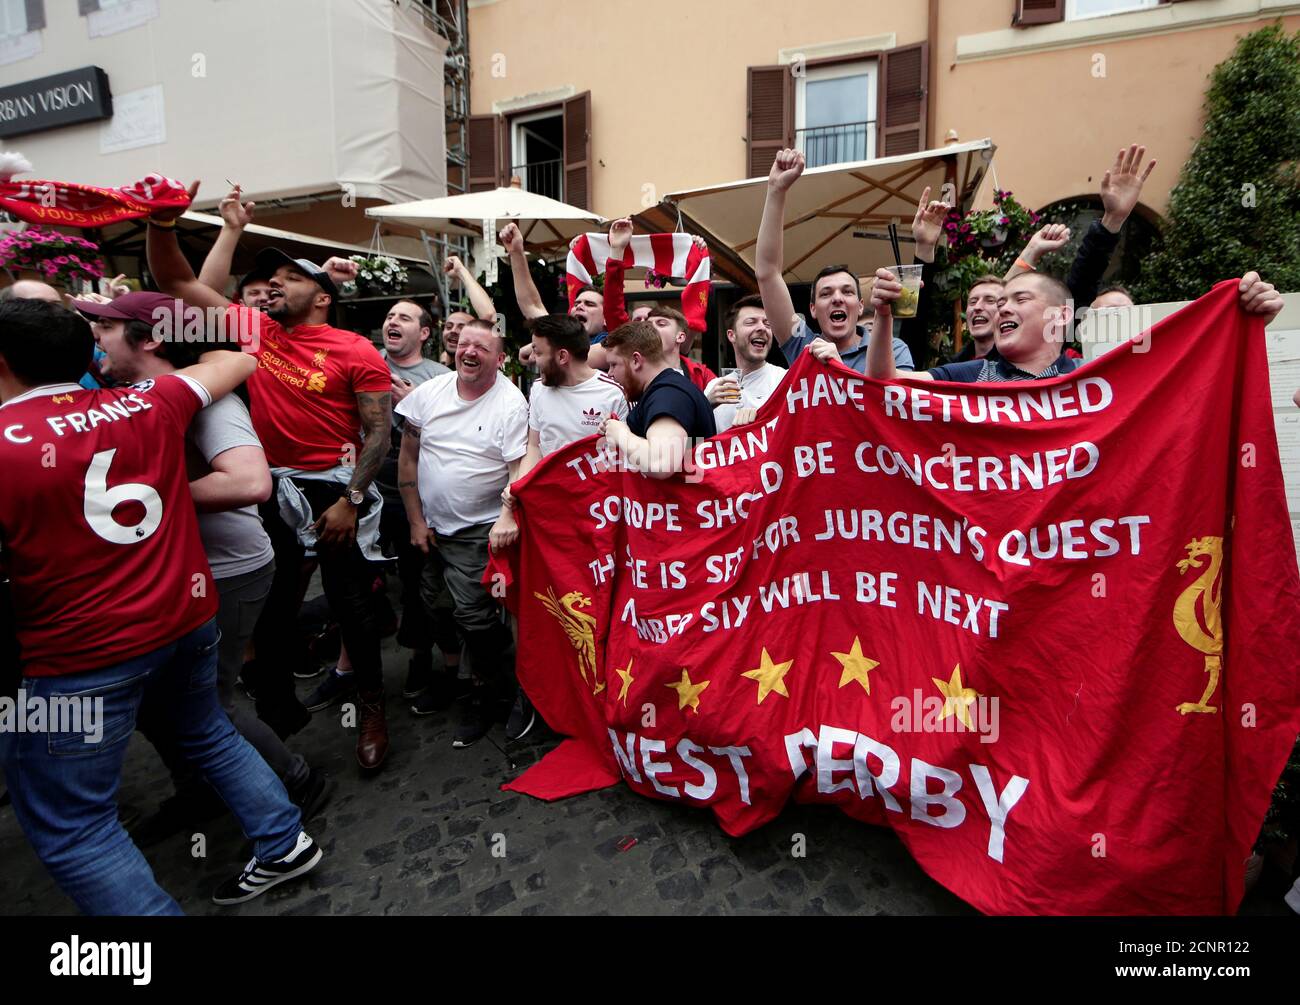 Liverpool supporters sing before the AS Roma vs Liverpool Champions League semi final soccer match in Rome, Italy, May 2, 2018. REUTERS/Yara Nardi Stock Photo